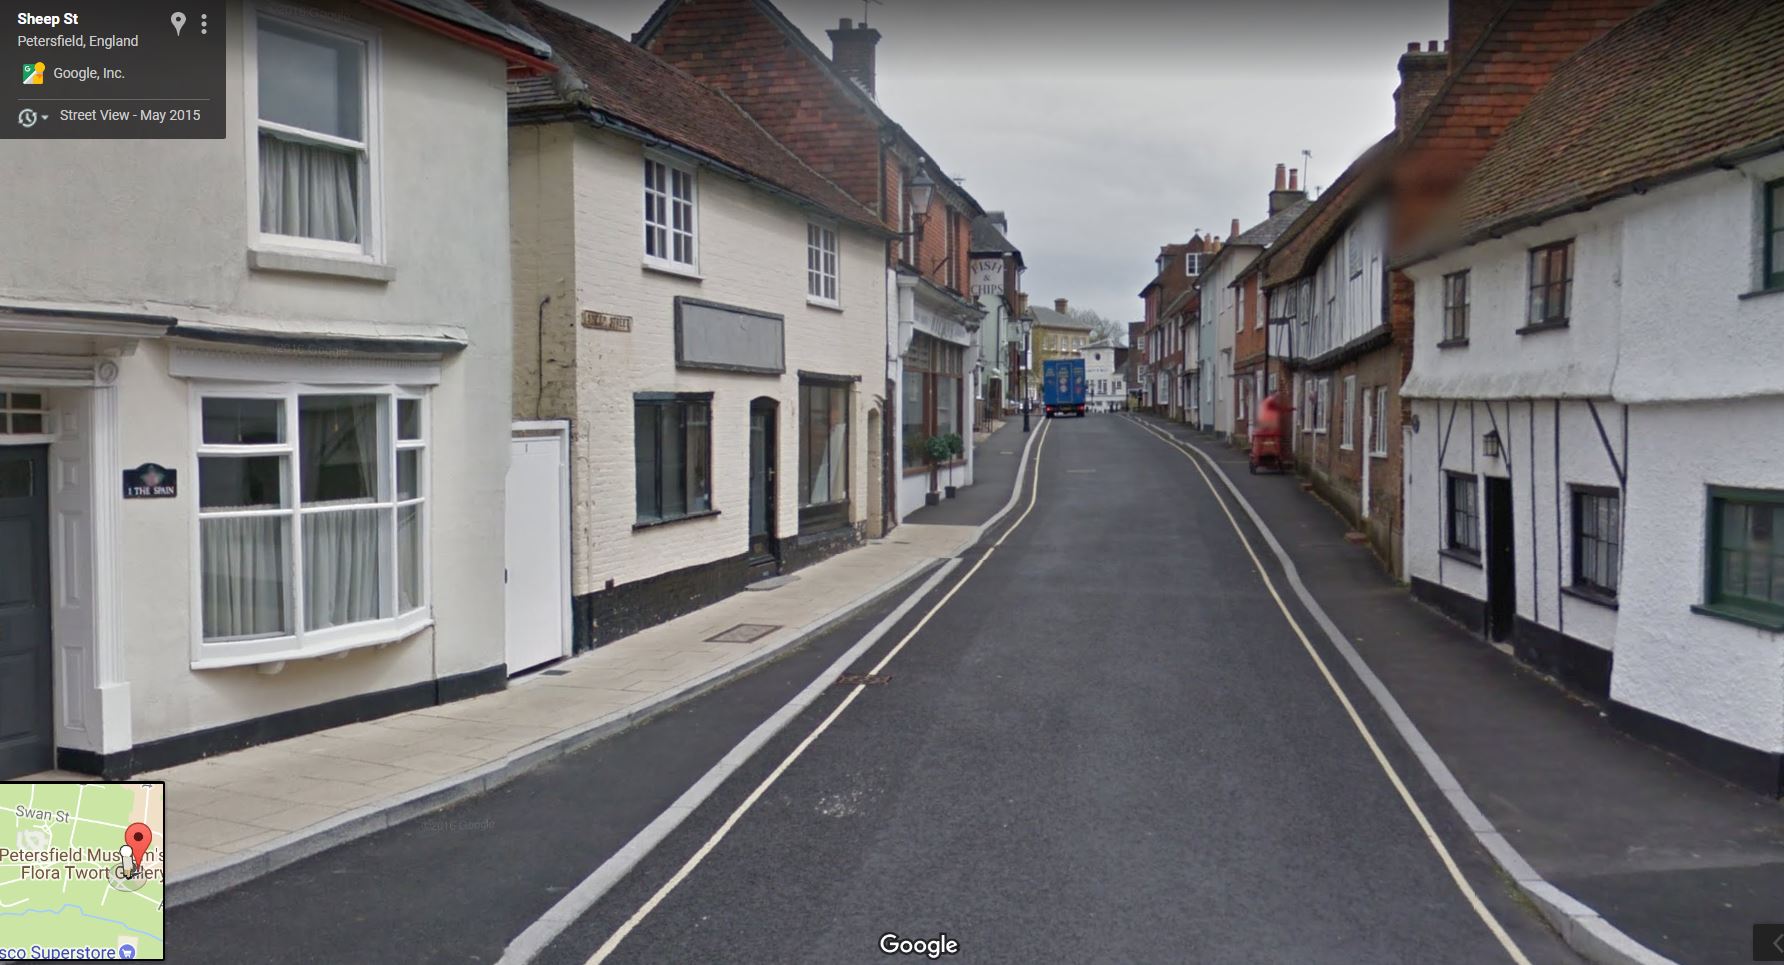 Sheep Street, Petersfield, Hampshire - click image to return